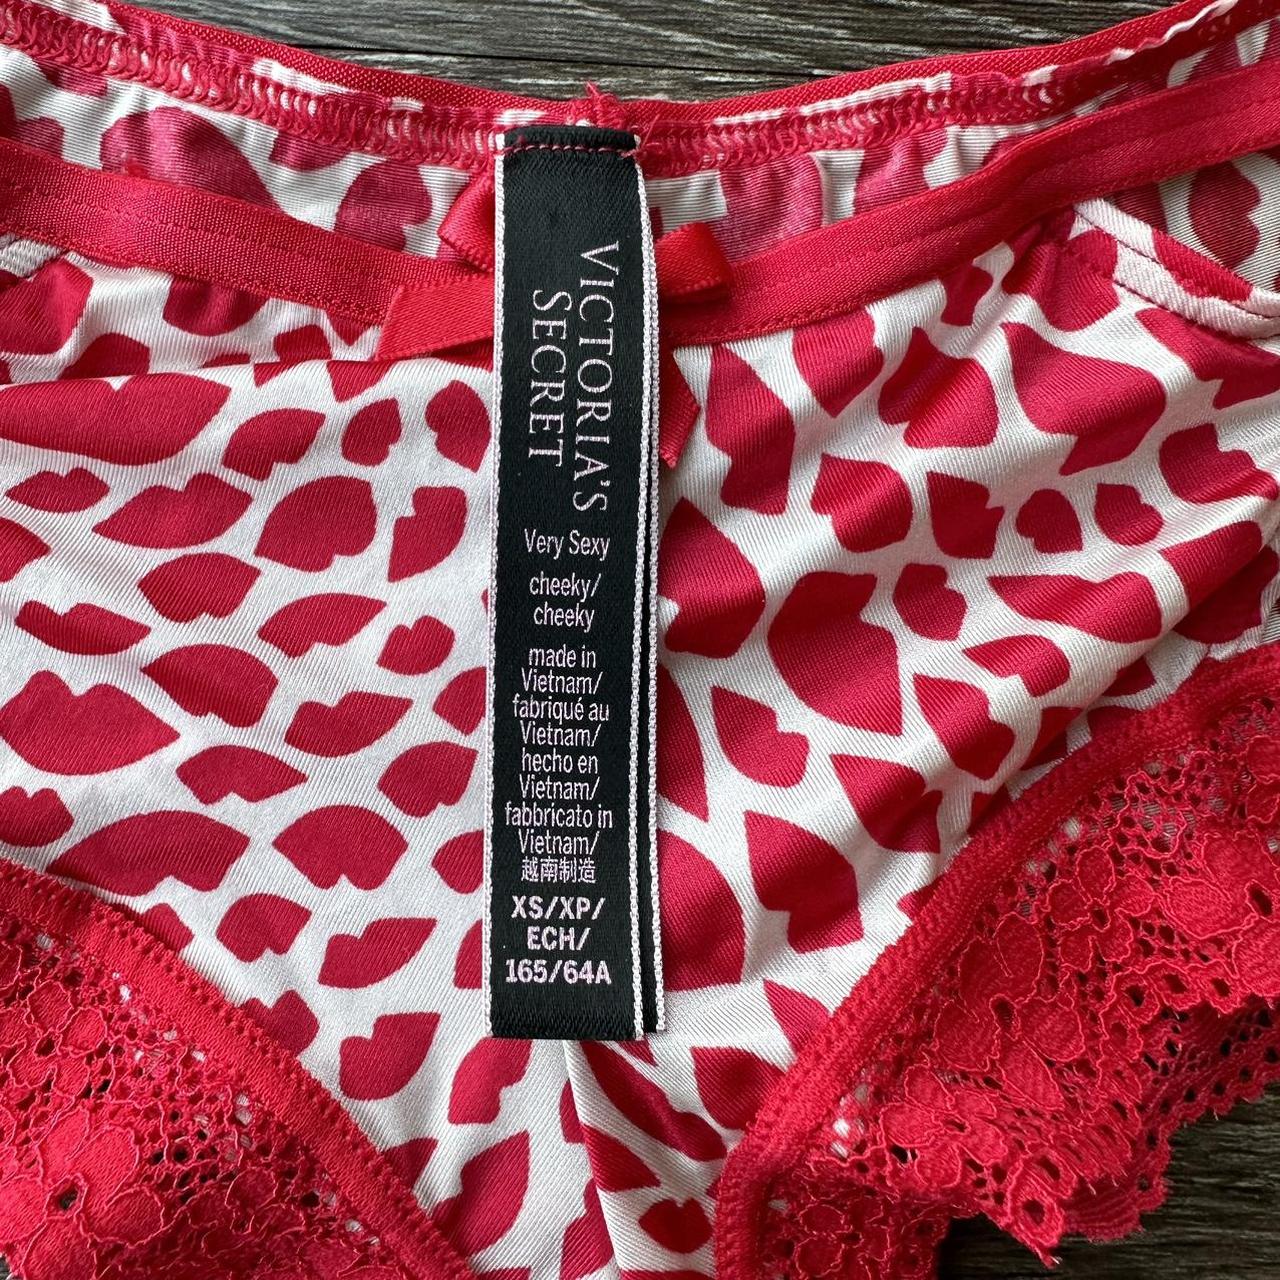 Victoria's Secret luxe strappy banded panty cheeky - Depop